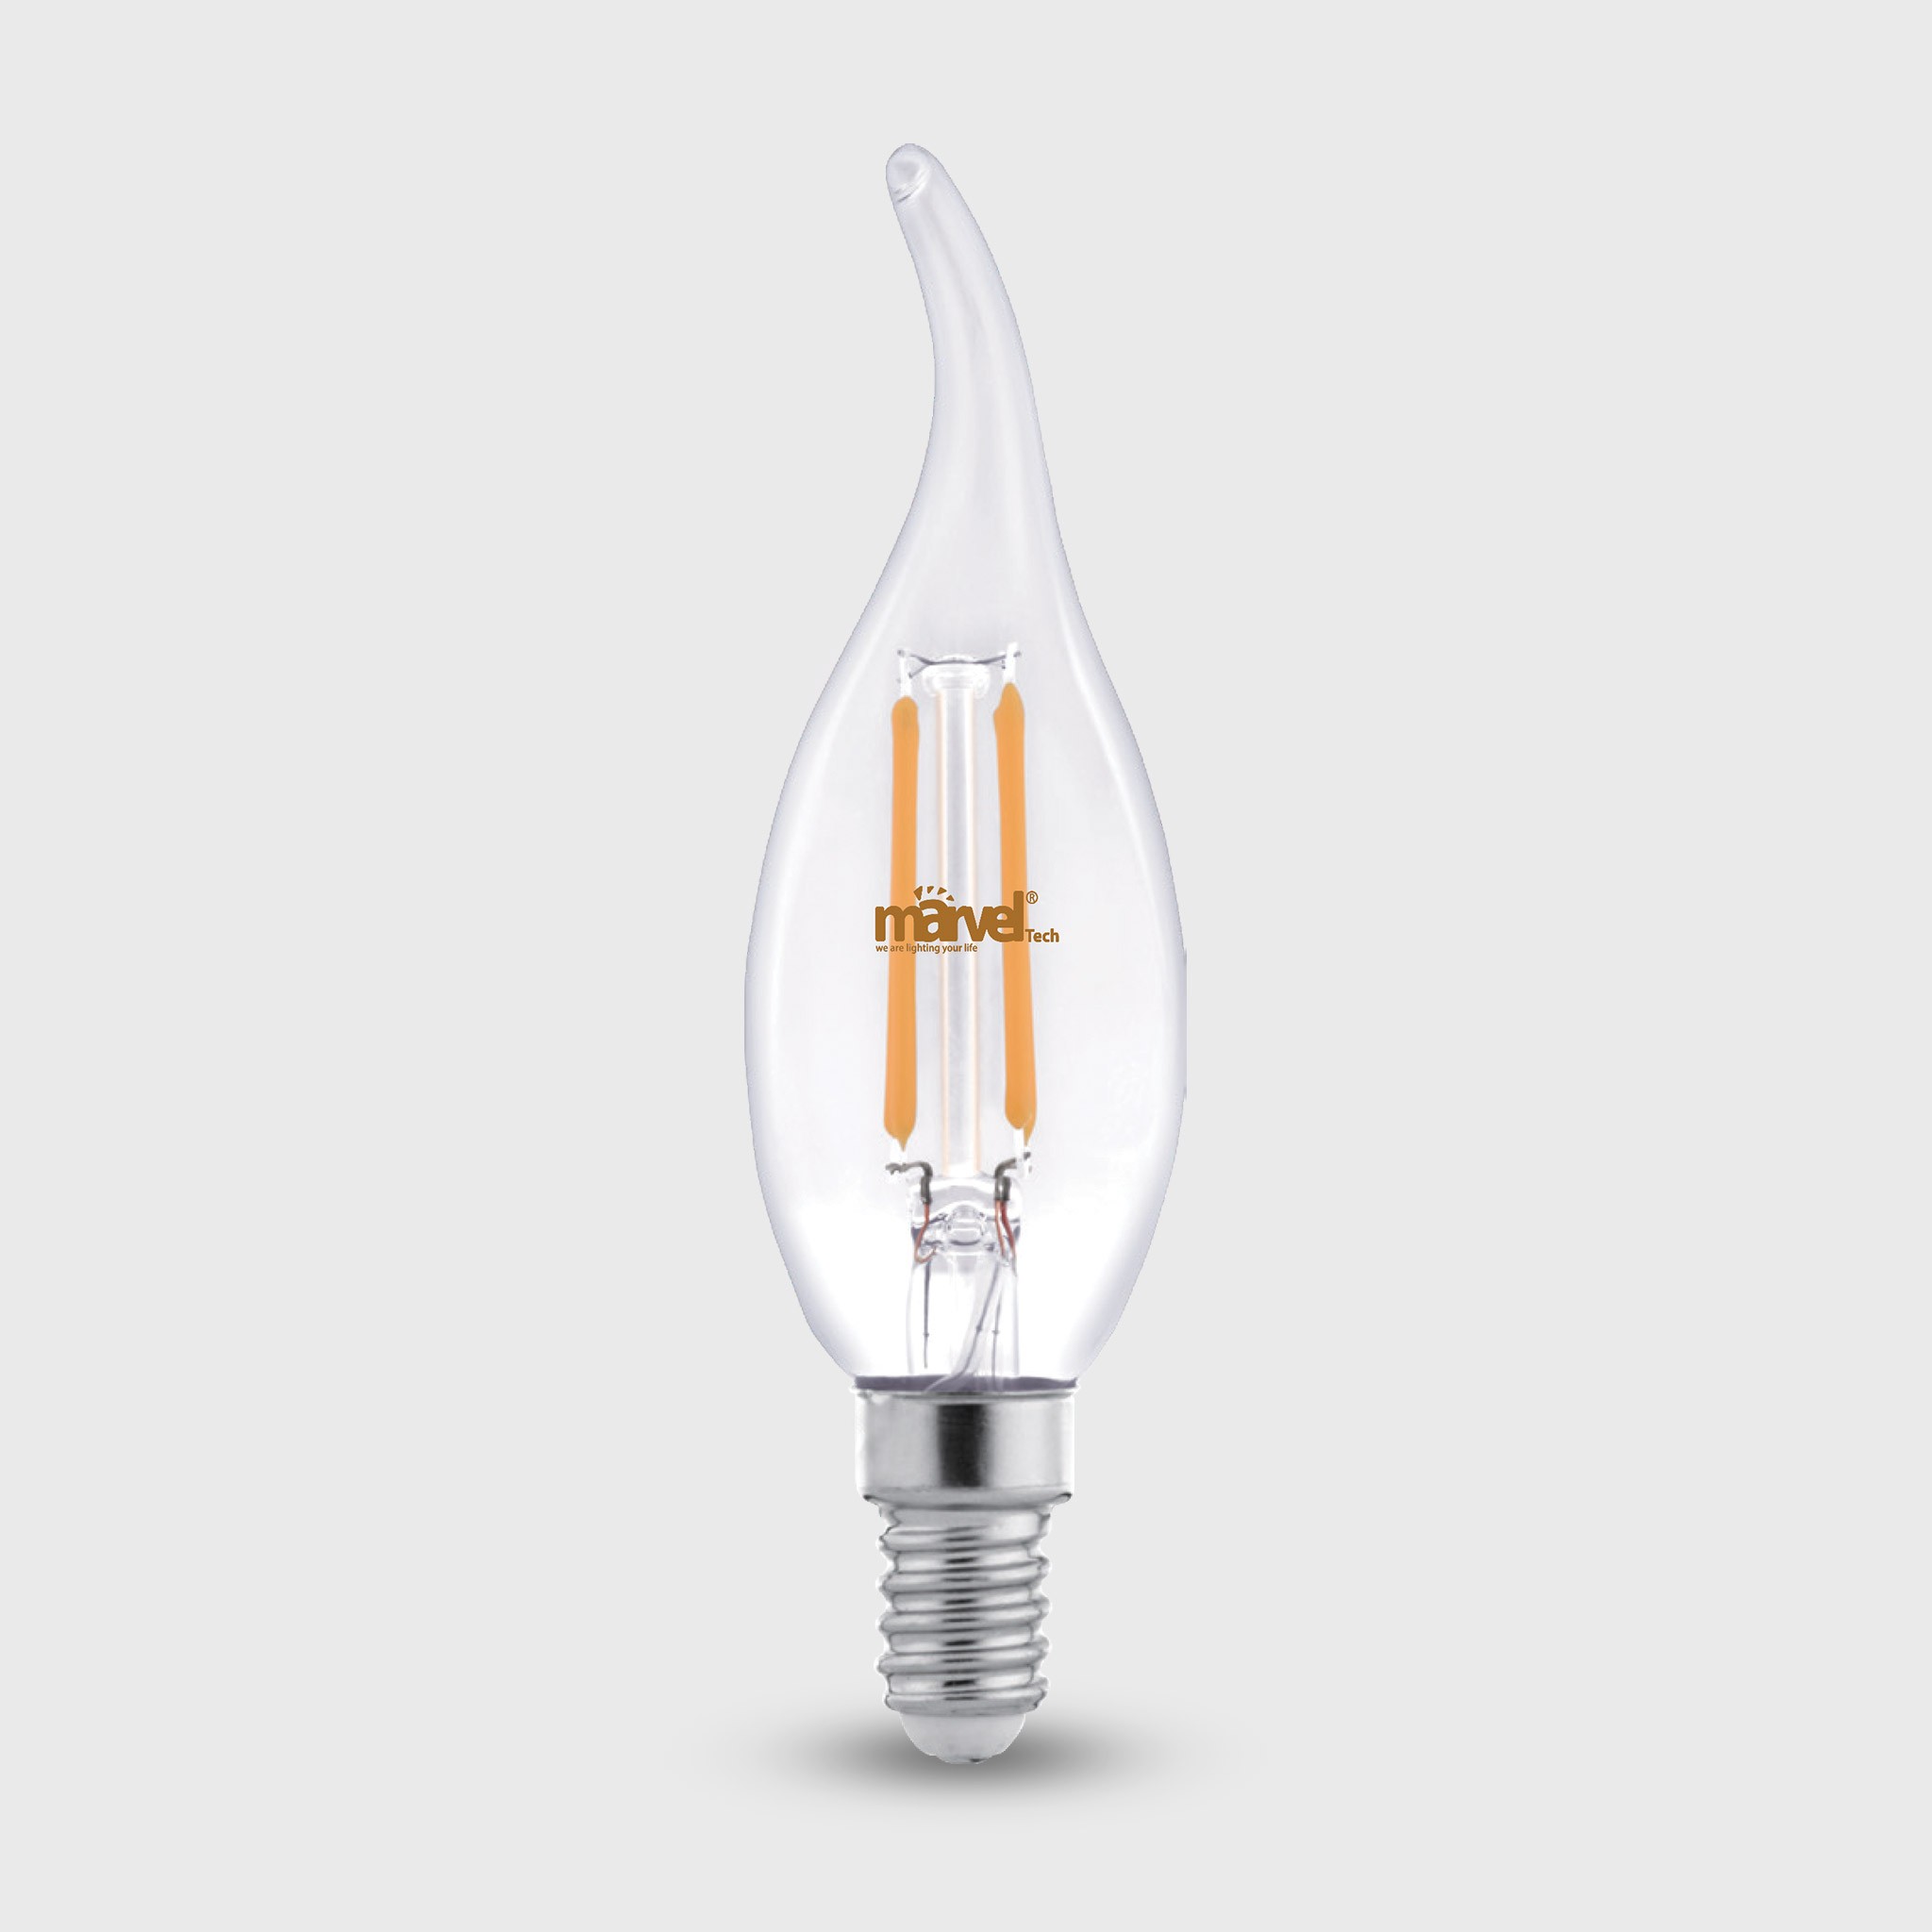 MS-22302 Filament Candle Light Clear 4W WW